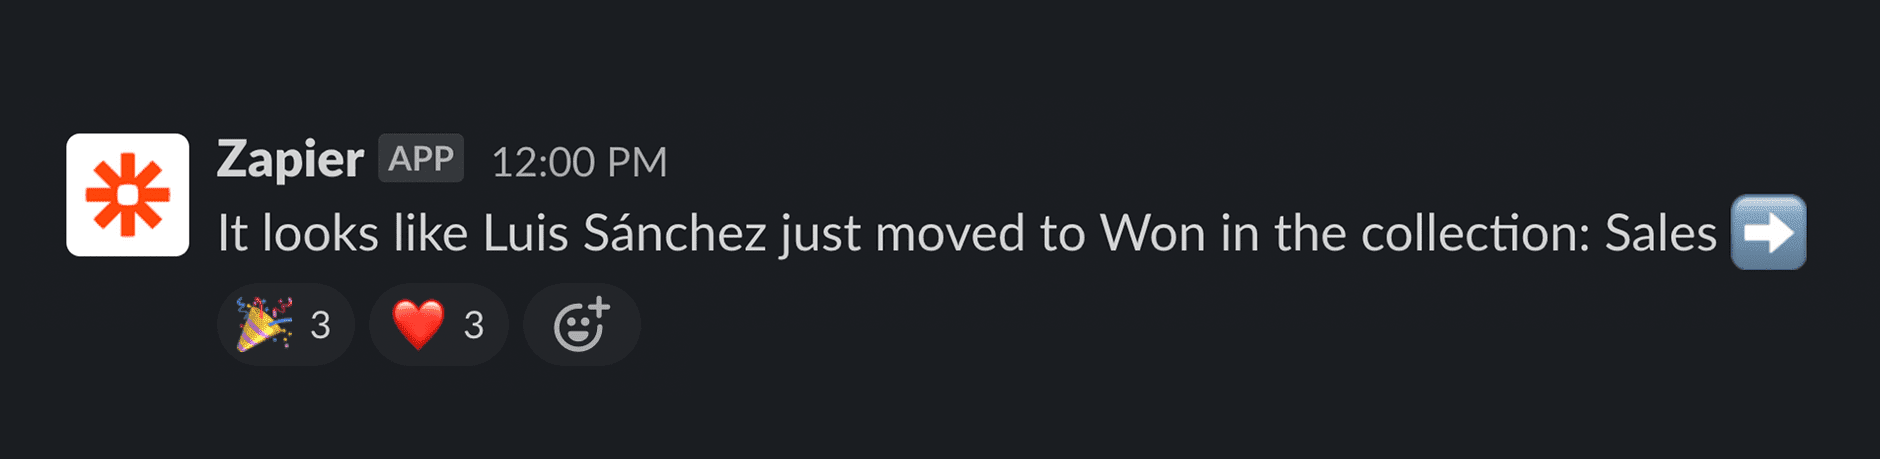 Our example Slack message - posted by a Zapier bot, reads 'It looks like Luis Sanchez just moved to Won in the list sales'. Several emoji reactions are visible too.